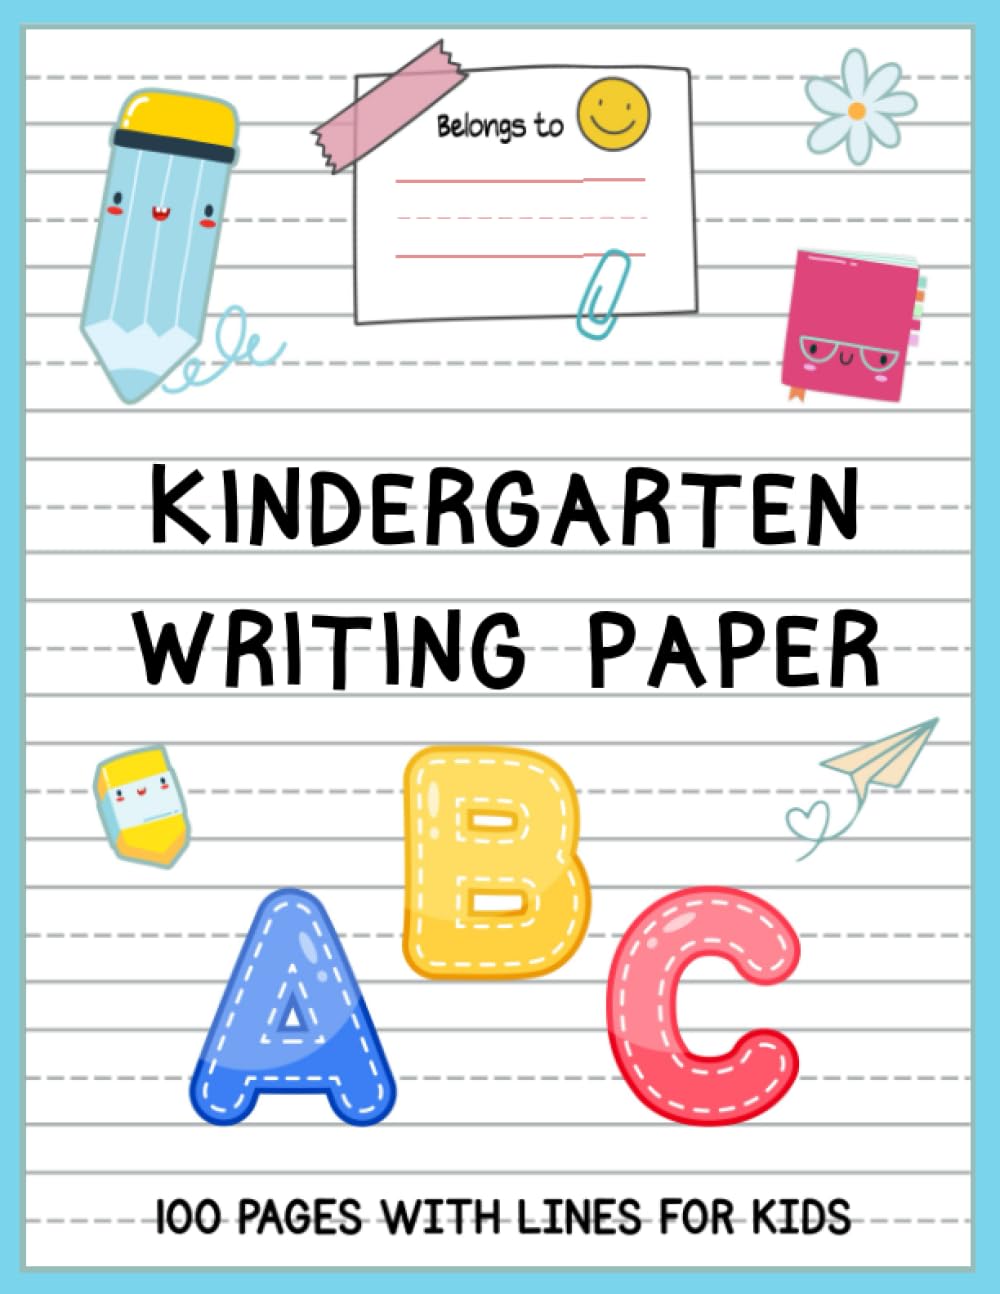 Kindergarten Writing Paper: 100 Blank Handwriting Practice Paper with Dotted Lines for Kids, 8.5 x 11 inches.